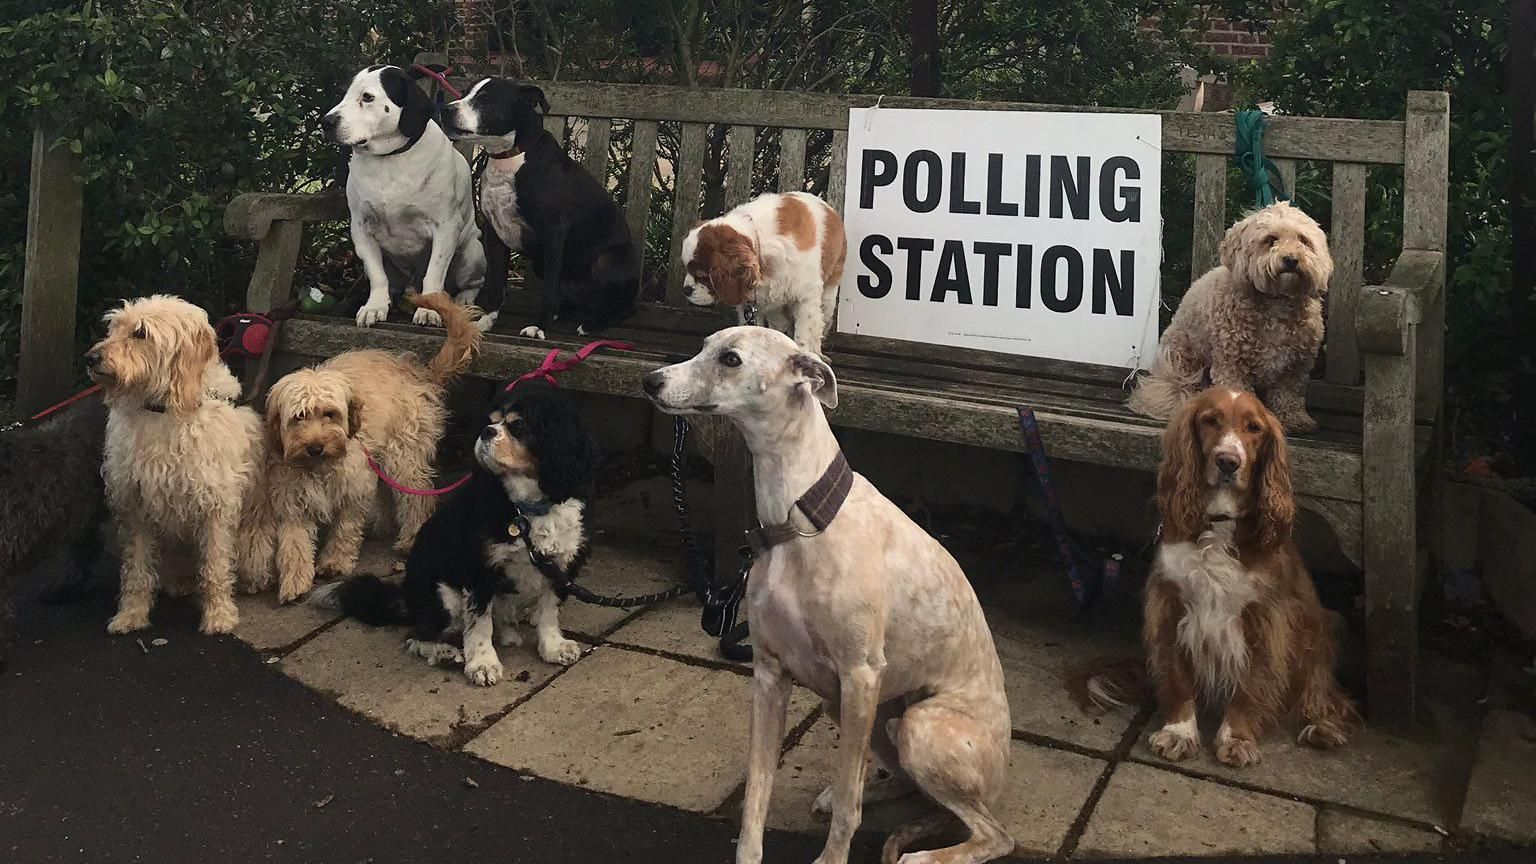 Nine dogs outside a polling station